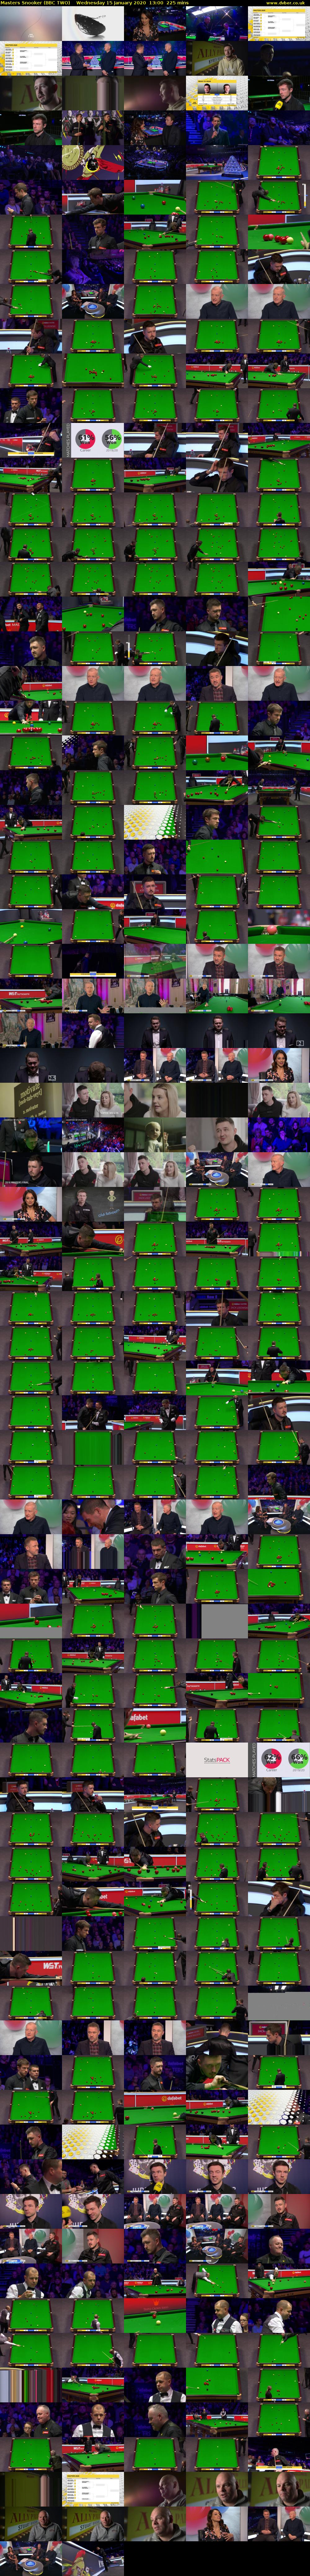 Masters Snooker (BBC TWO) Wednesday 15 January 2020 13:00 - 16:45